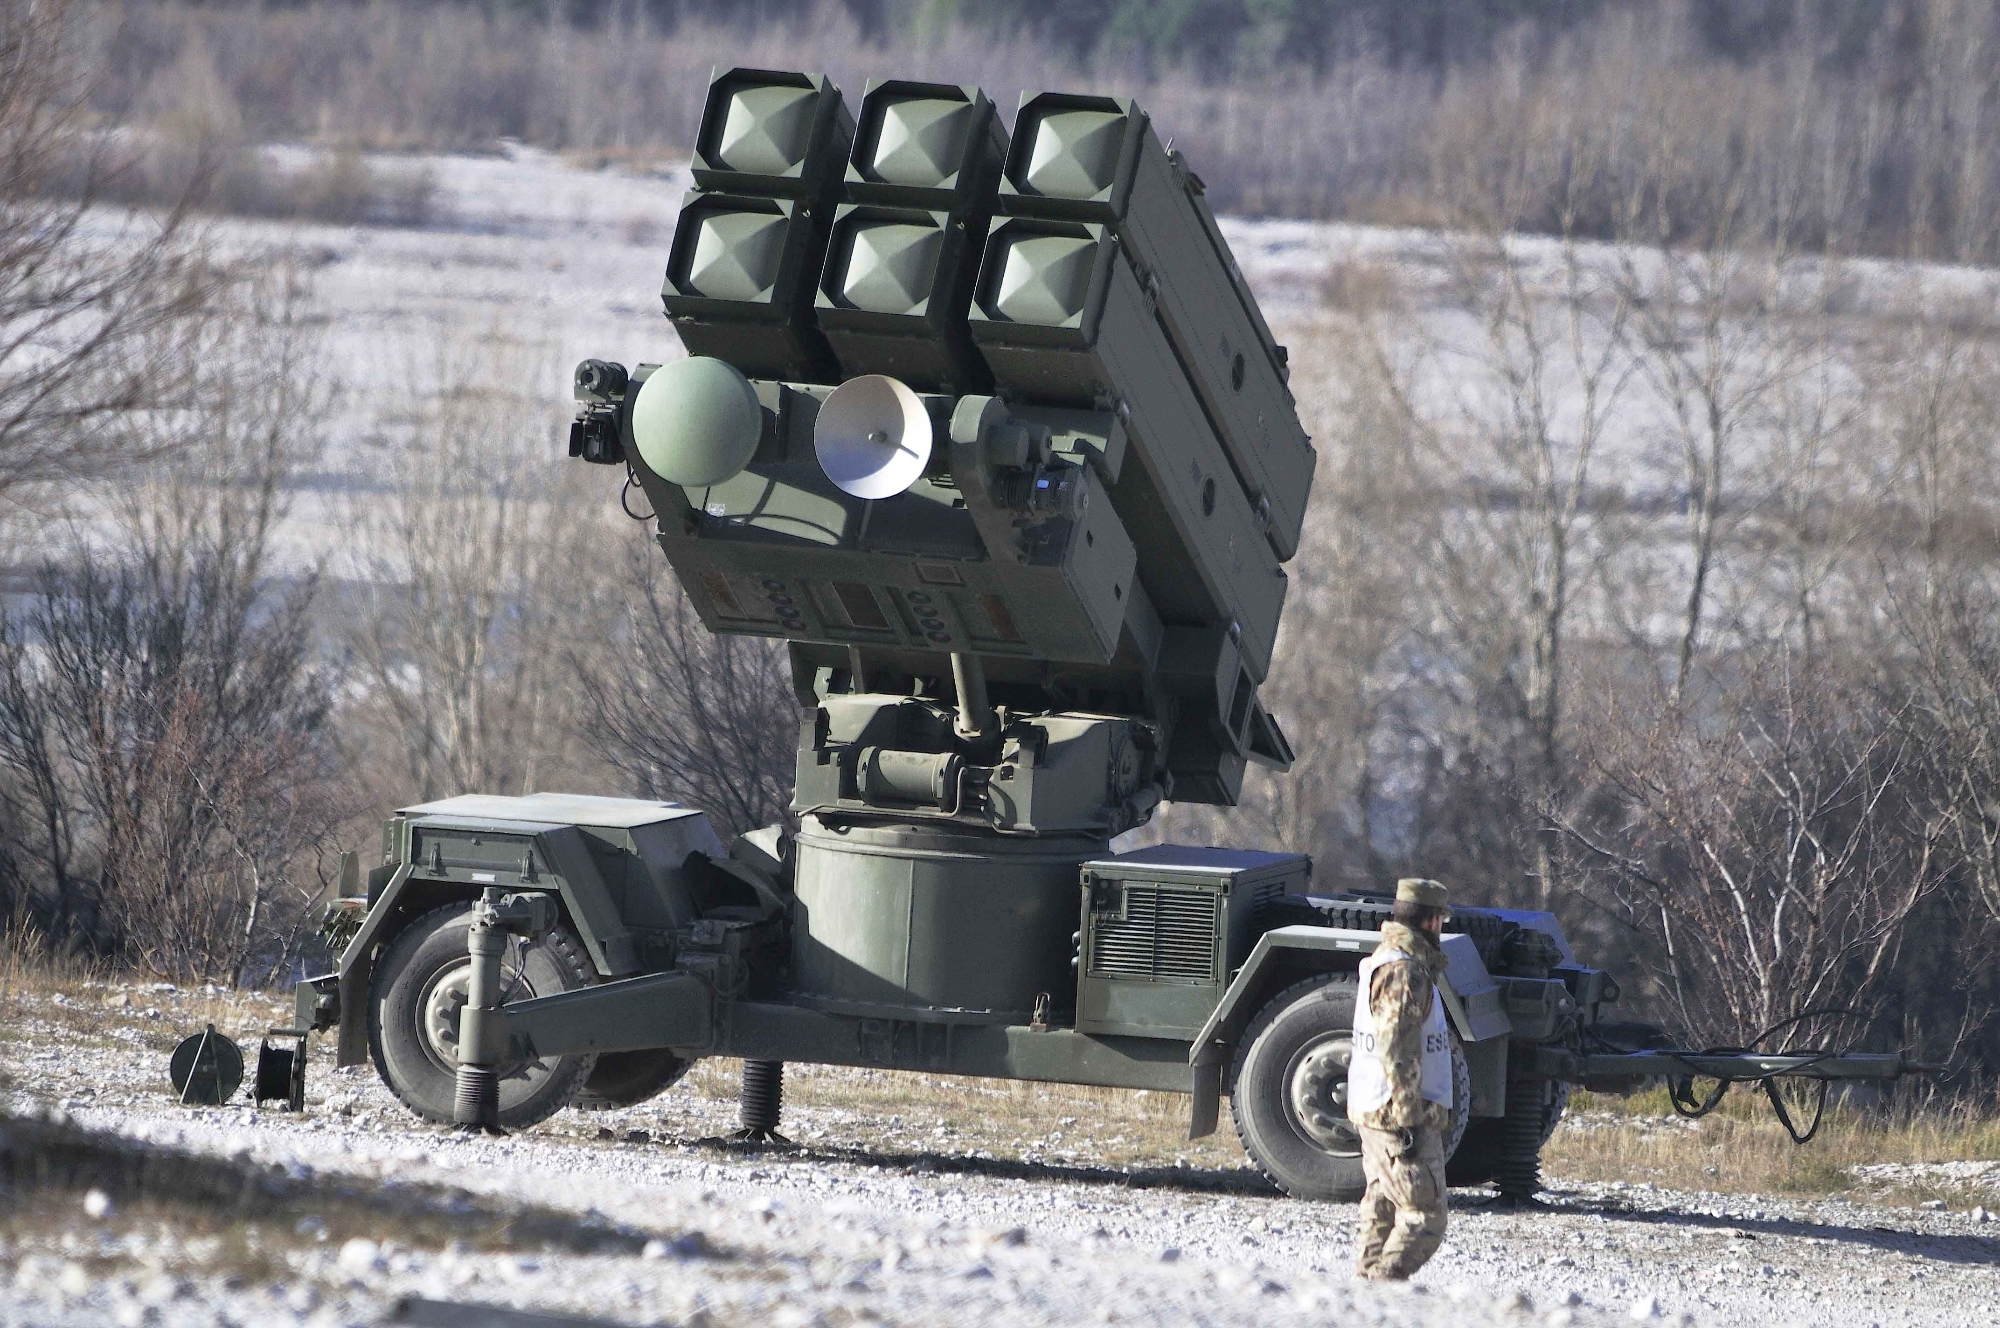 Aspide air defense systems, Hawk air defense system, ATGMs and grenade launchers: Spain gives Ukraine a new package of military aid